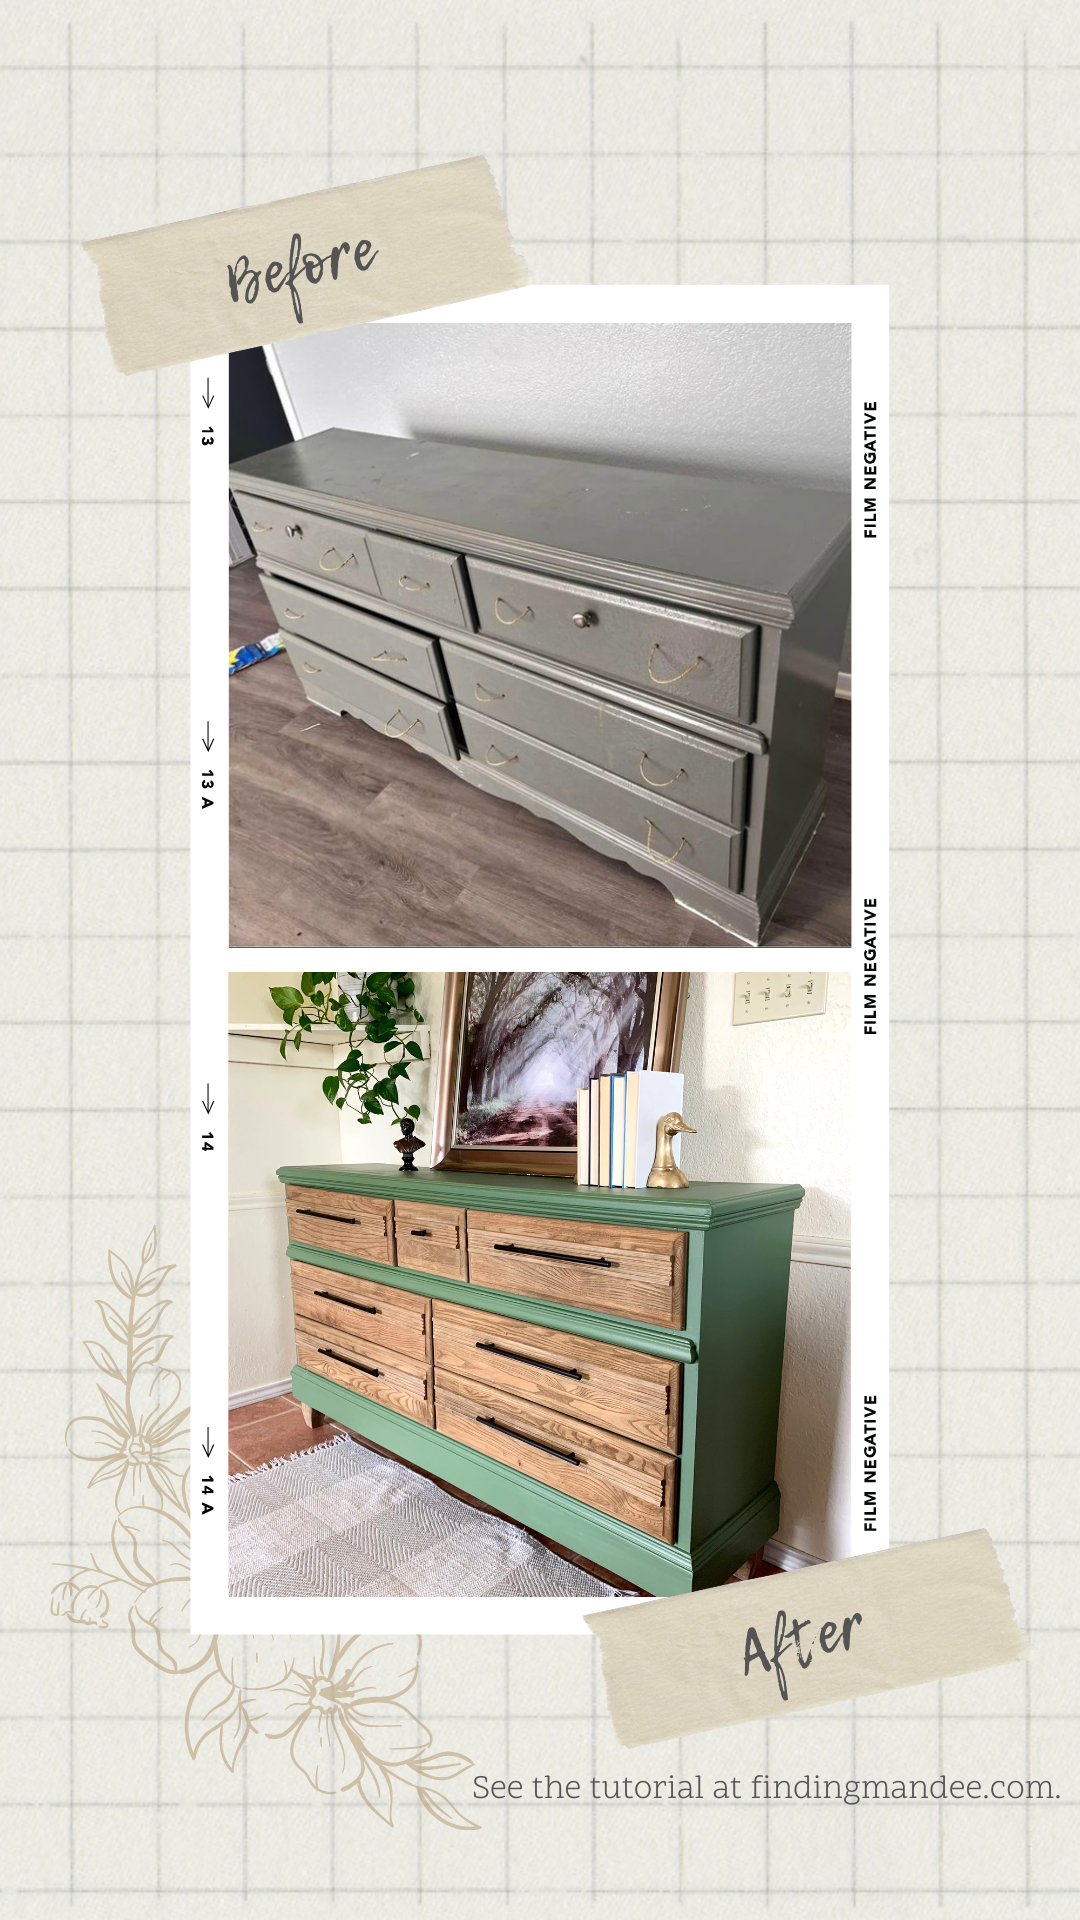 Before and After Furniture Flip | Finding Mandee